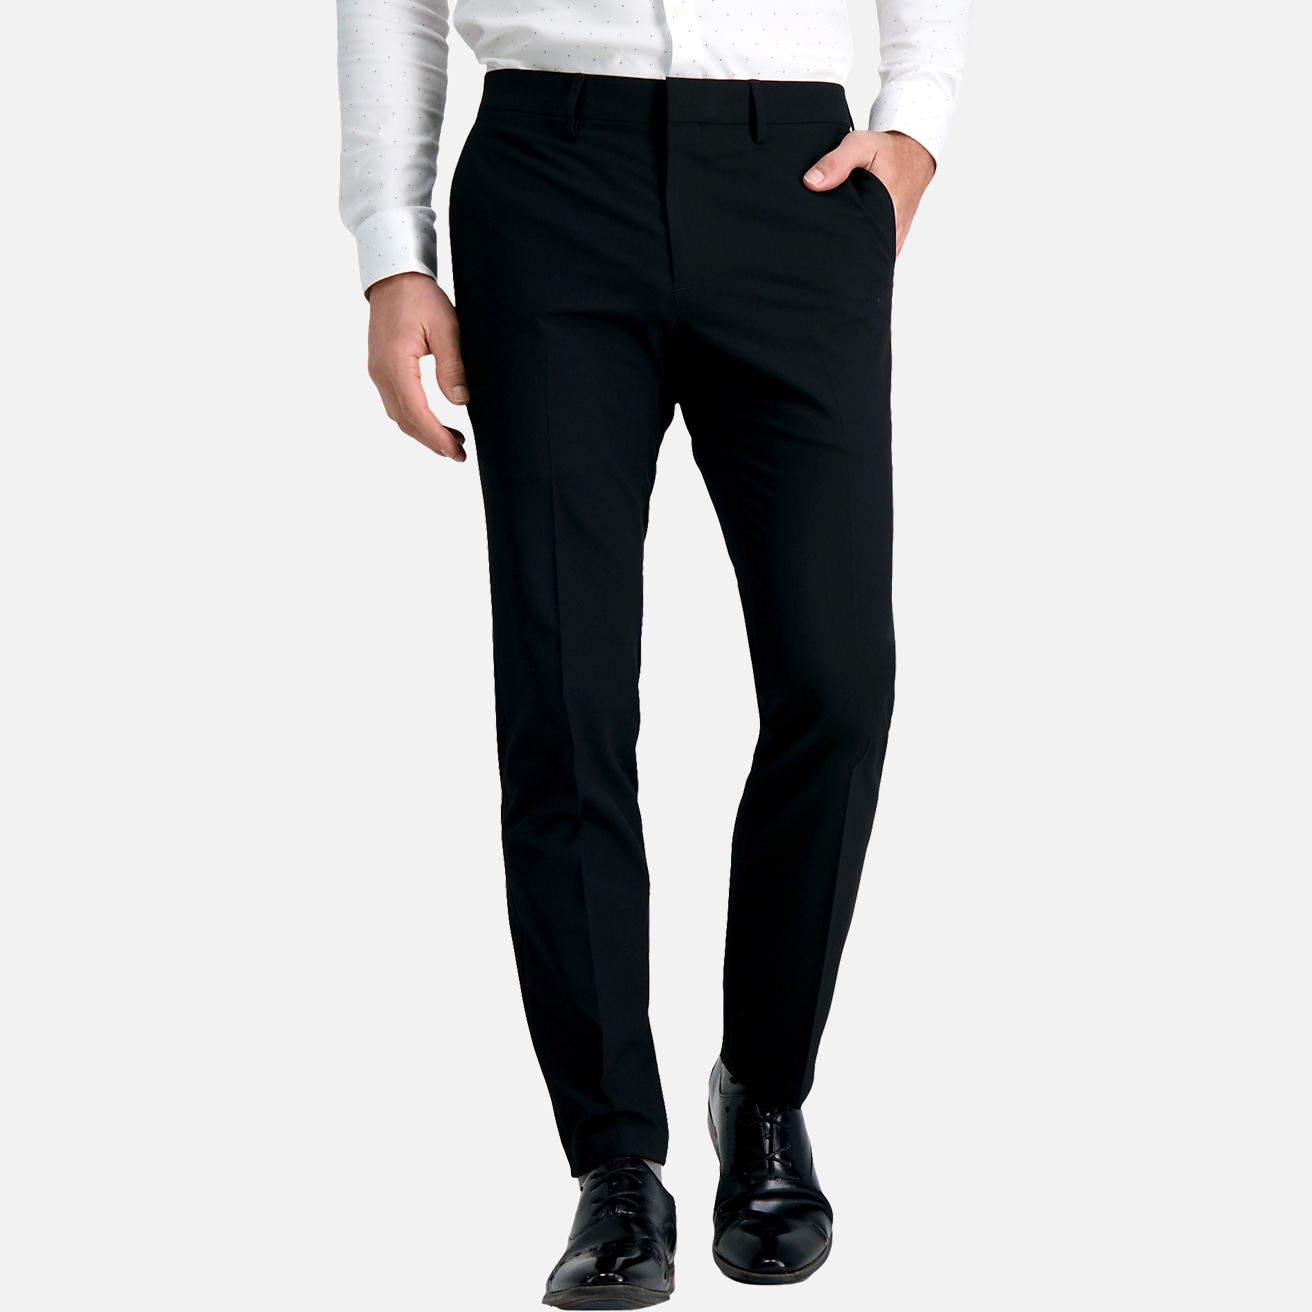 https://image.menswearhouse.com/is/image/TMW/TMW_237E_02_HAGGAR_CASUAL_PANTS_BLACK_SOLID_MAIN?imPolicy=pdp-mob-2x